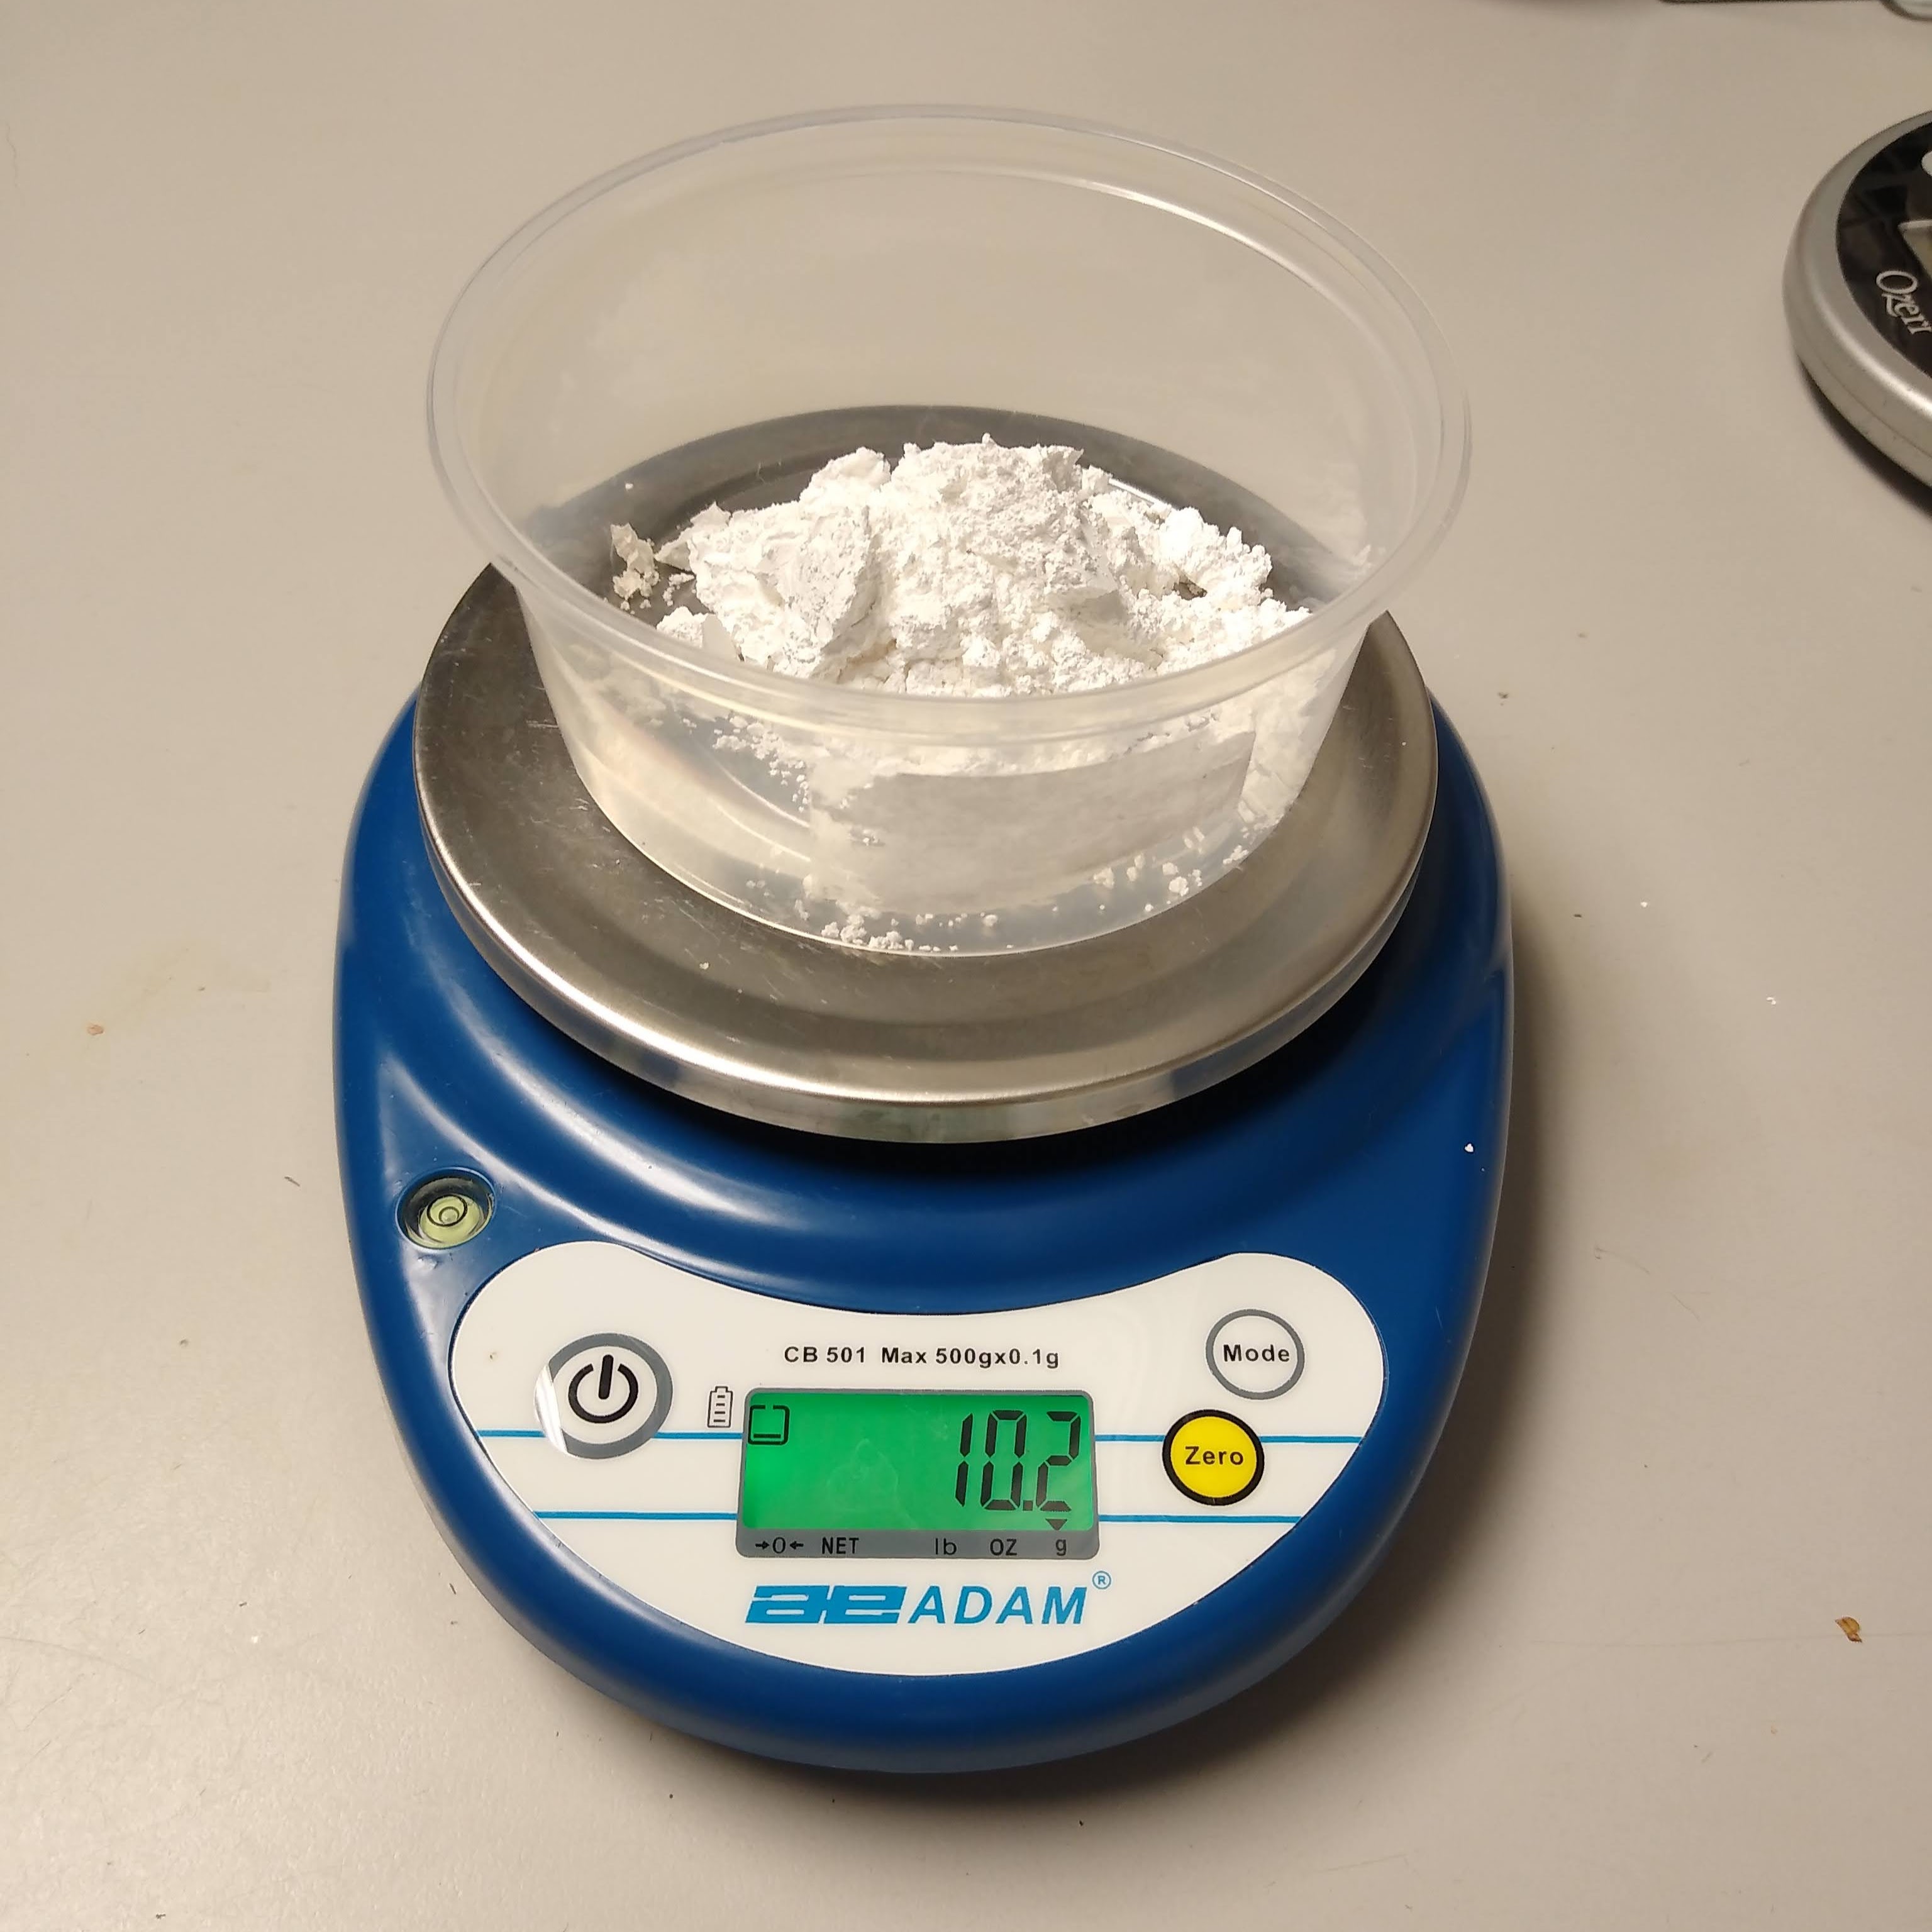 A blue horse feed and supplement scale weighing a white powder in a plastic cup.